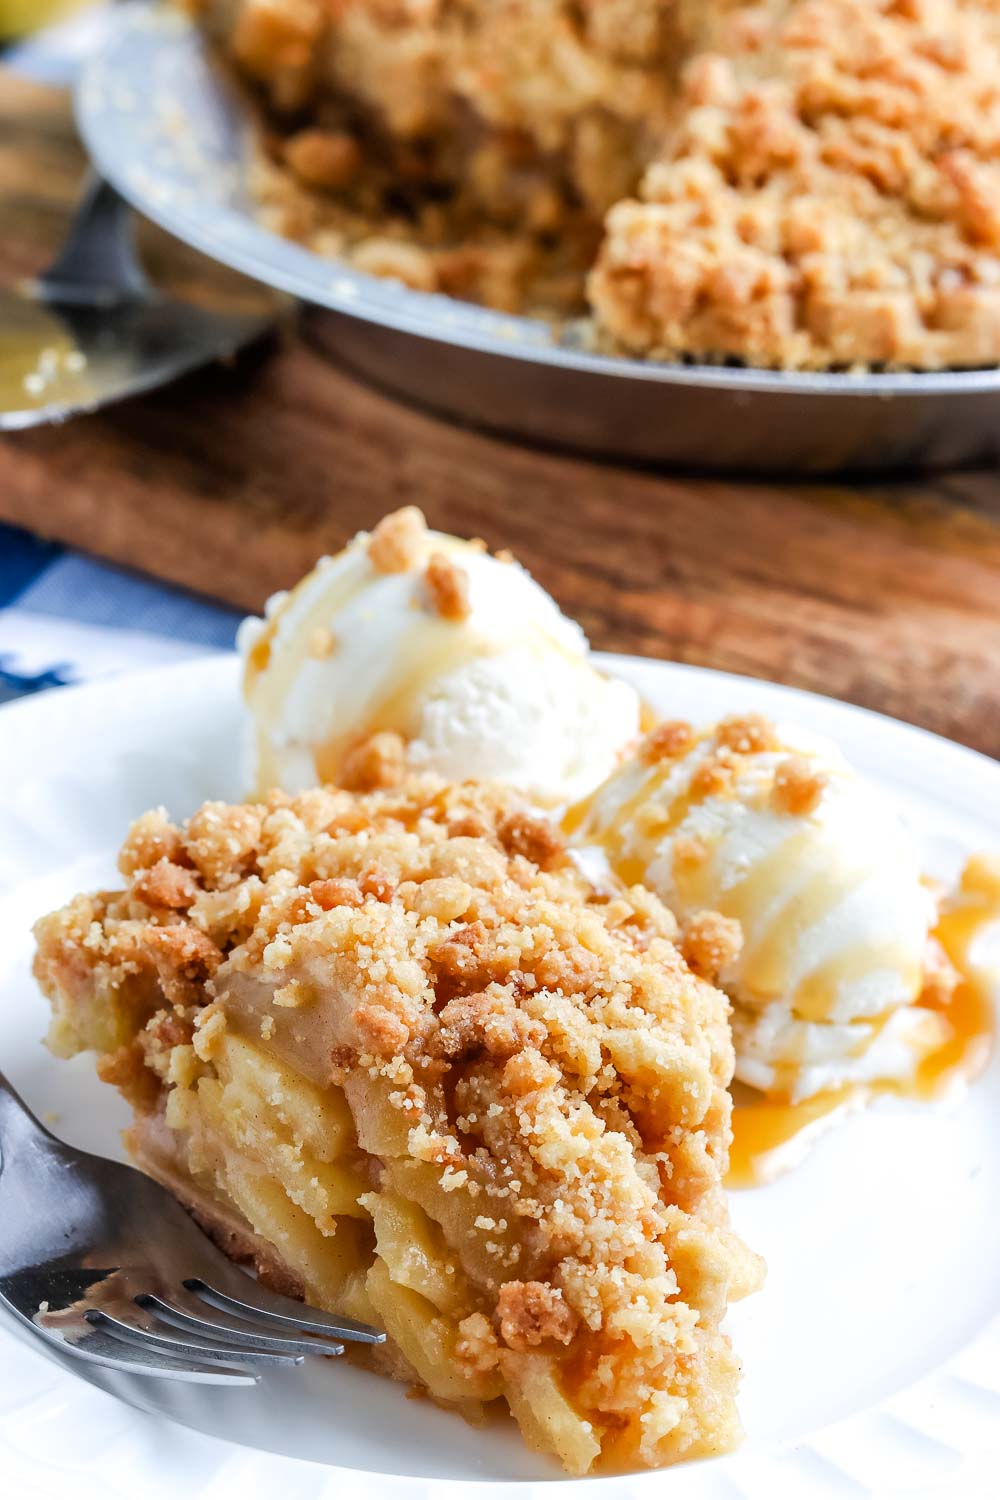 A slice of Dutch Apple Pie on a white plate with two scoops of vanilla ice cream.